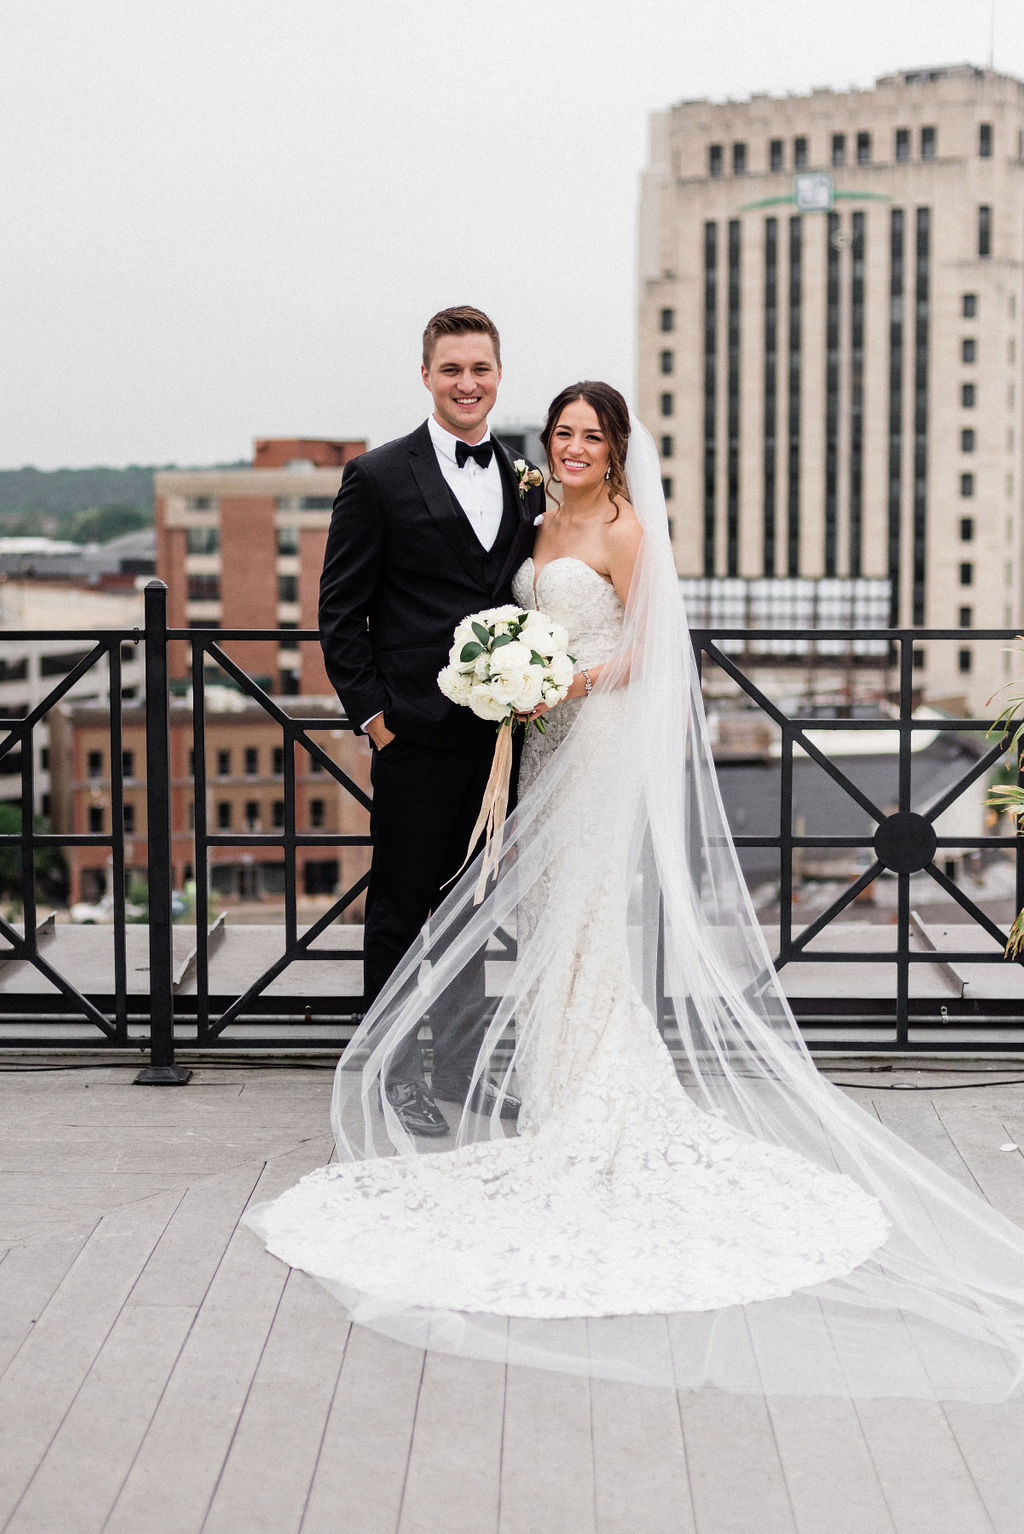 A bride and groom smiling during their downtown kalamazoo wedding